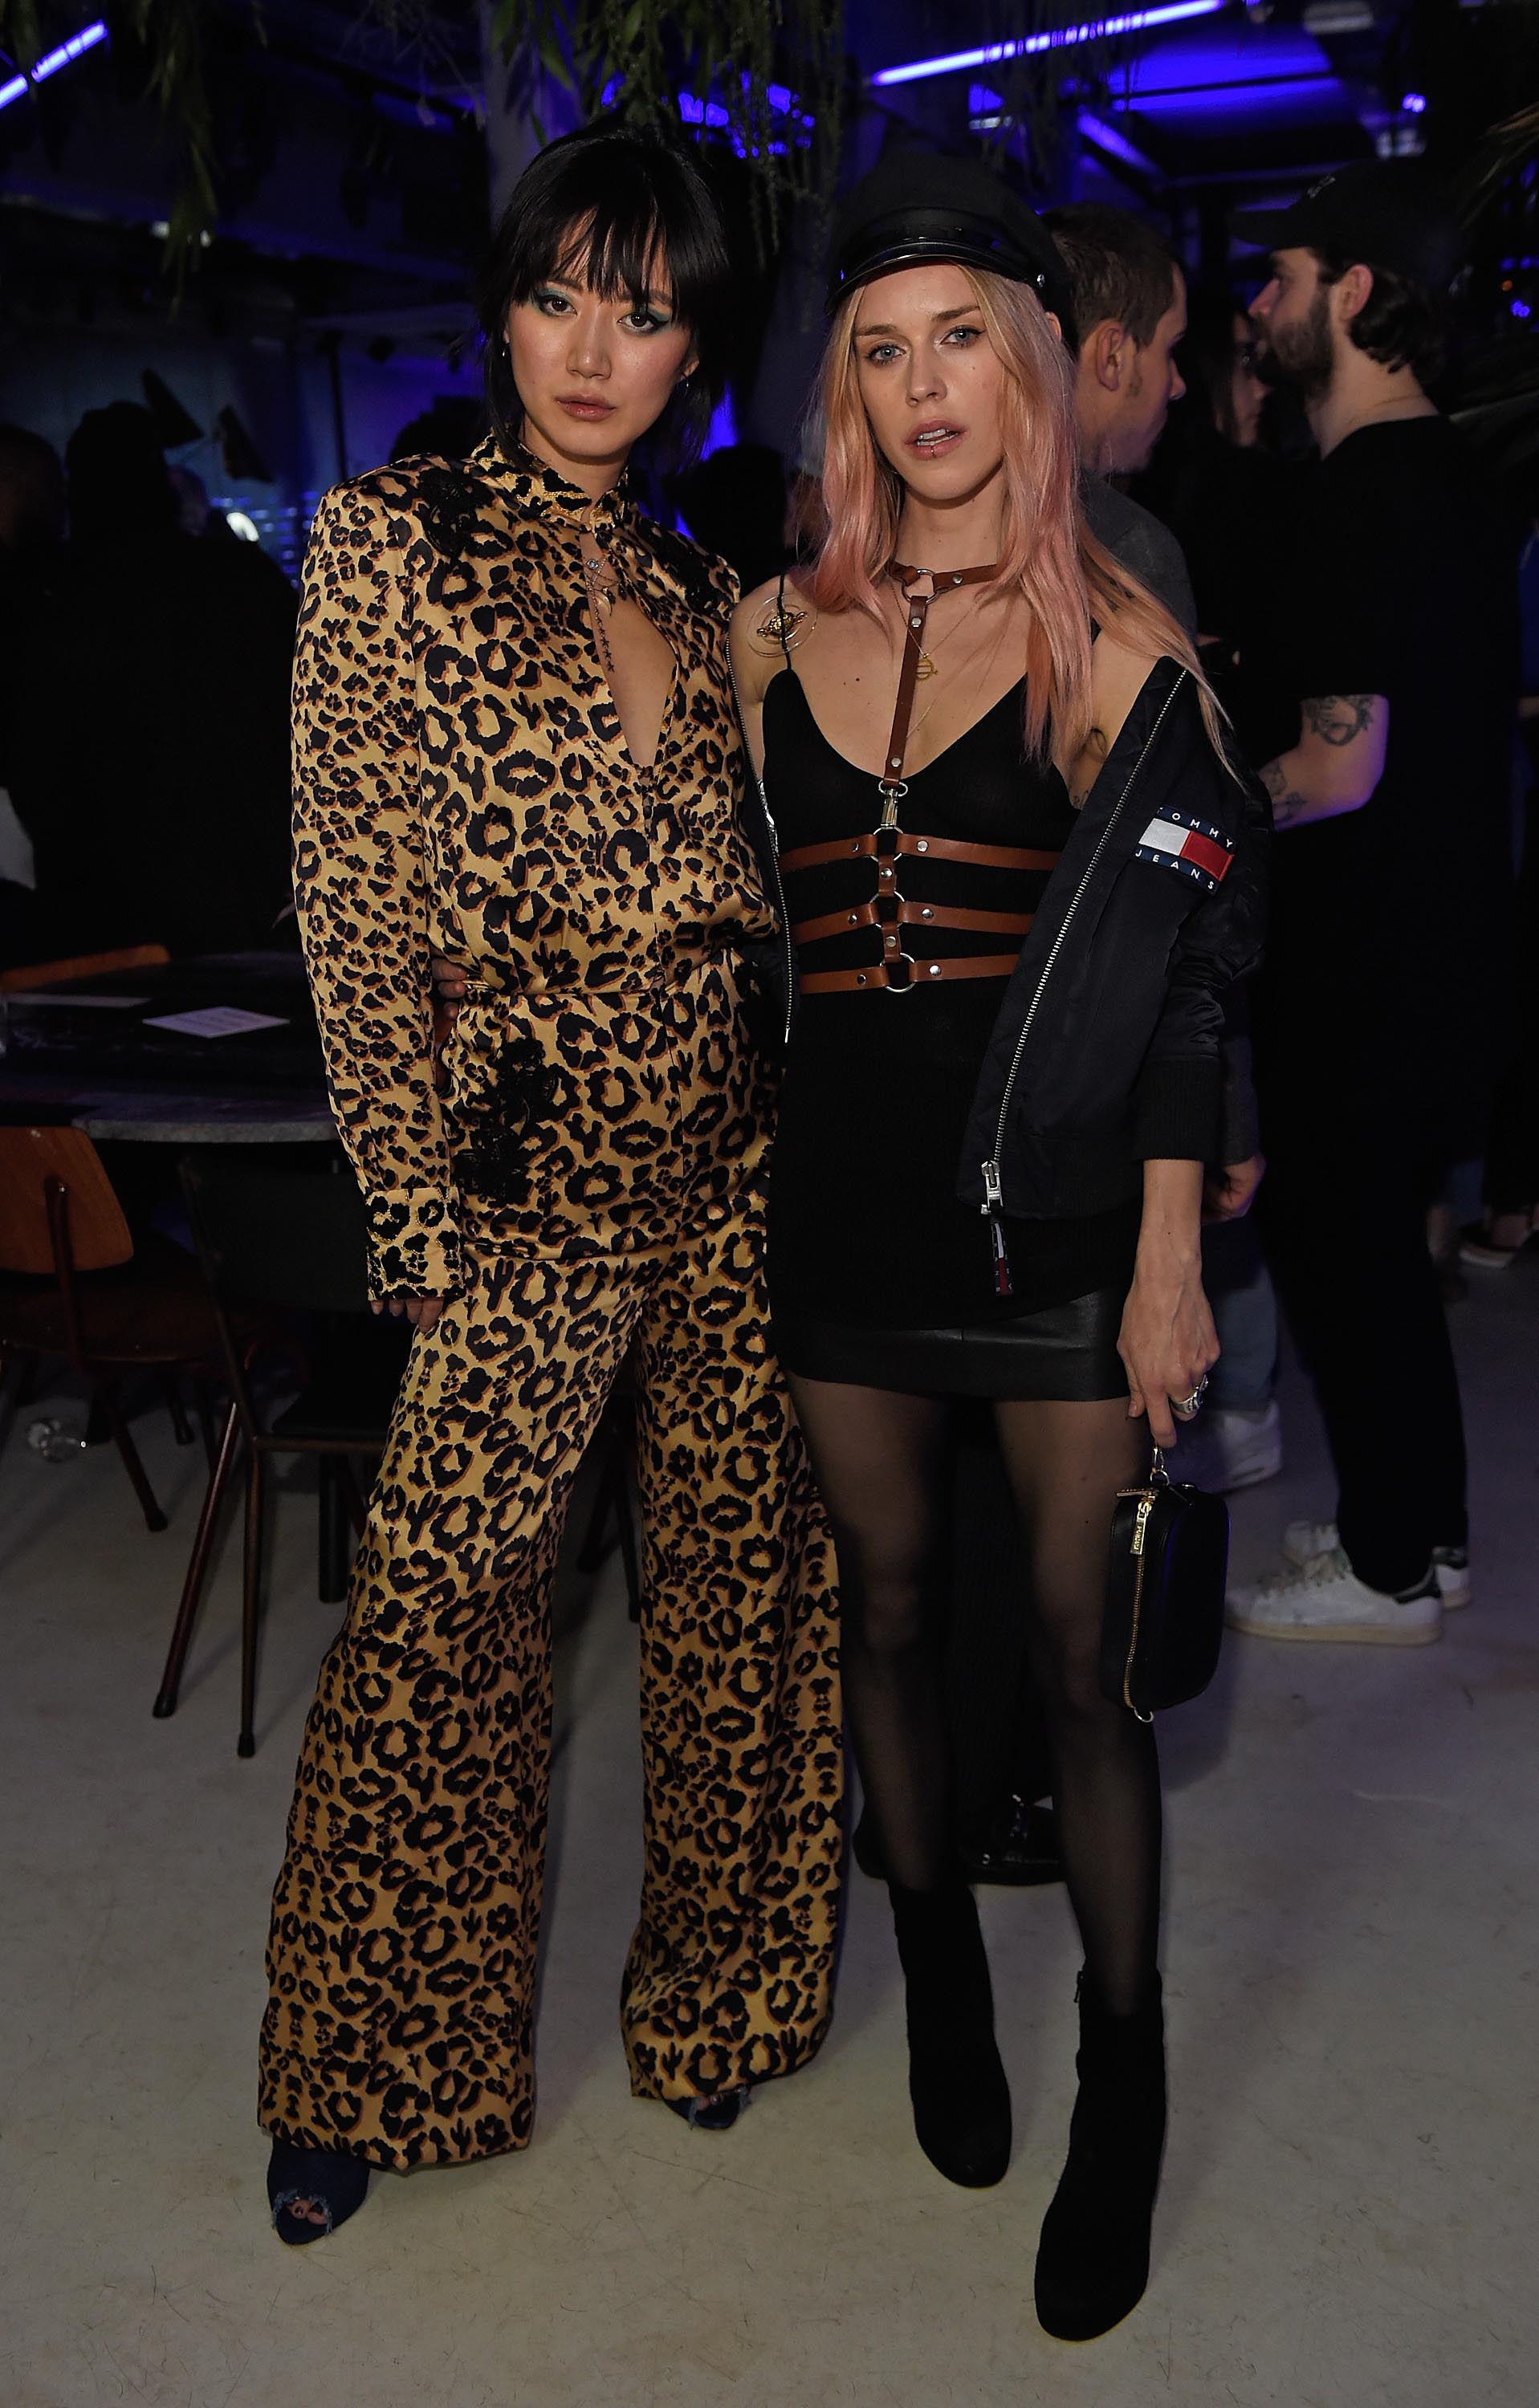 Mary Charteris attends the launch of the JF London x Kyle De’Volle fw 2017 capsule collection